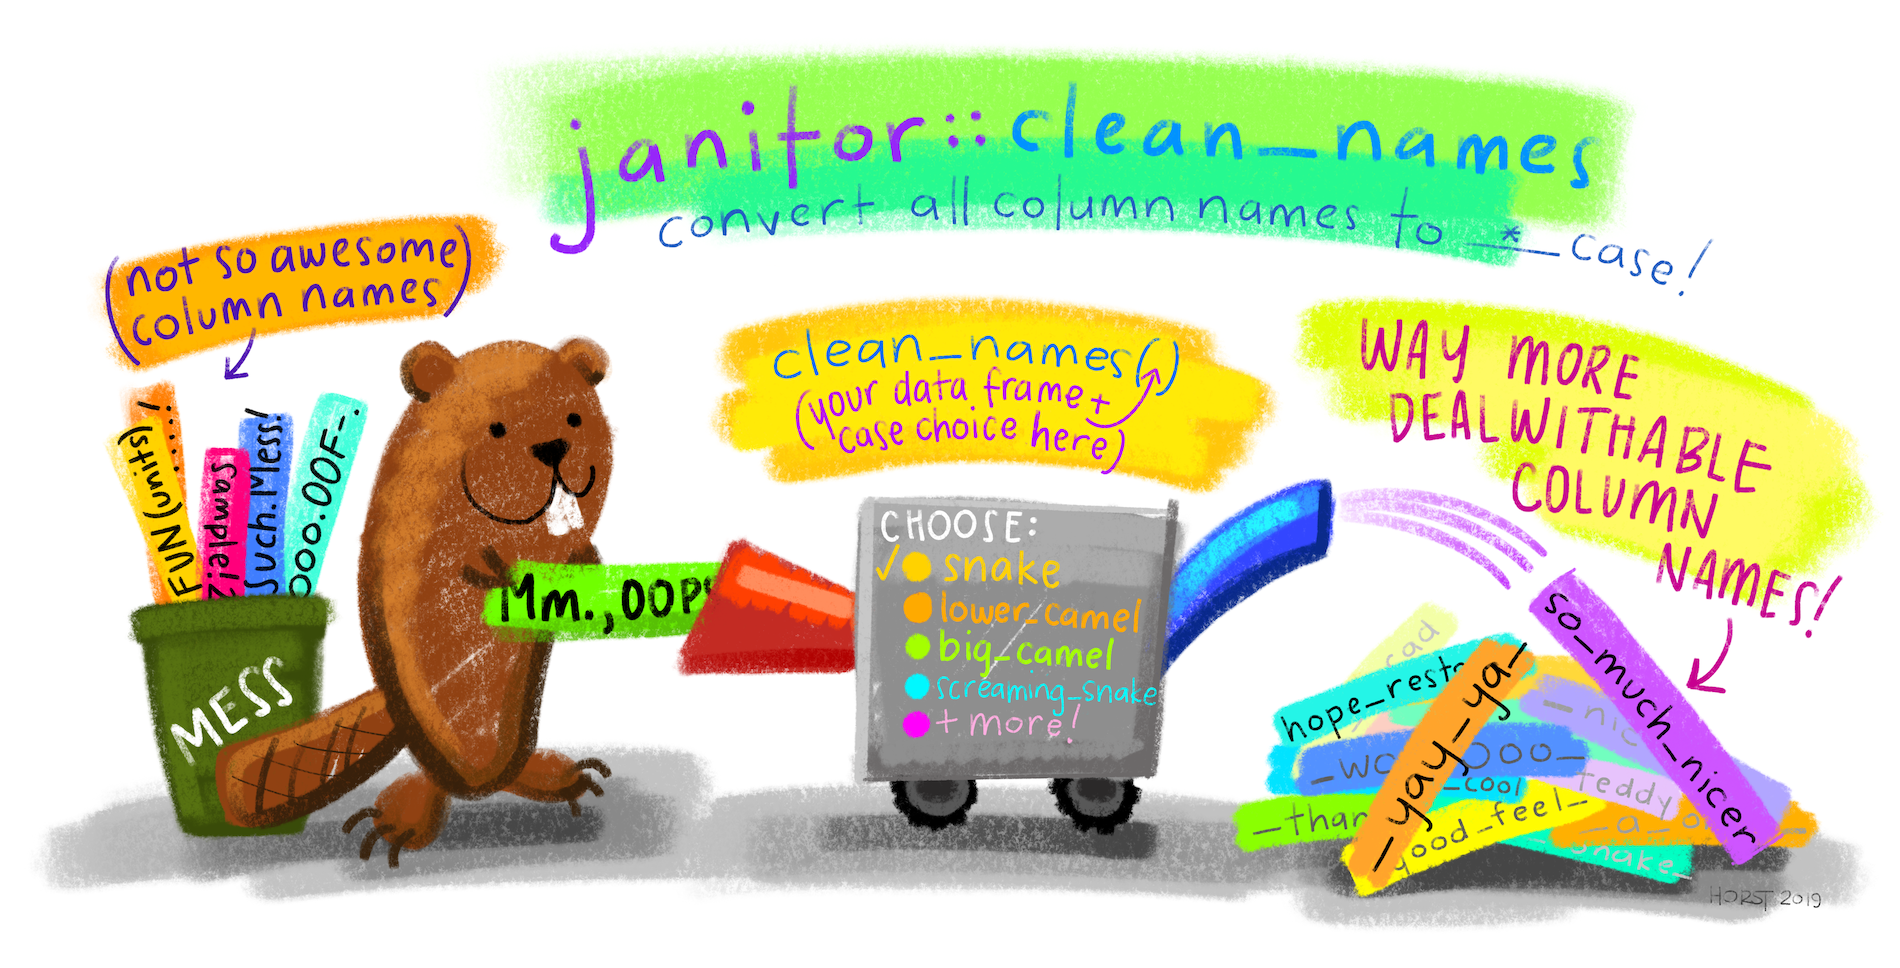 Title text: janitor::clean_names(): convert all column names to *_case! Below, a cartoon beaver putting shapes with long, messy column names (pulled from a bin labeled MESS and not so awesome column names) into a contraption that converts them to lower snake case. The output has stylized text reading “Way more deal-withable column names. Learn more about clean_names and other *awesome* data cleaning tools in janitor.